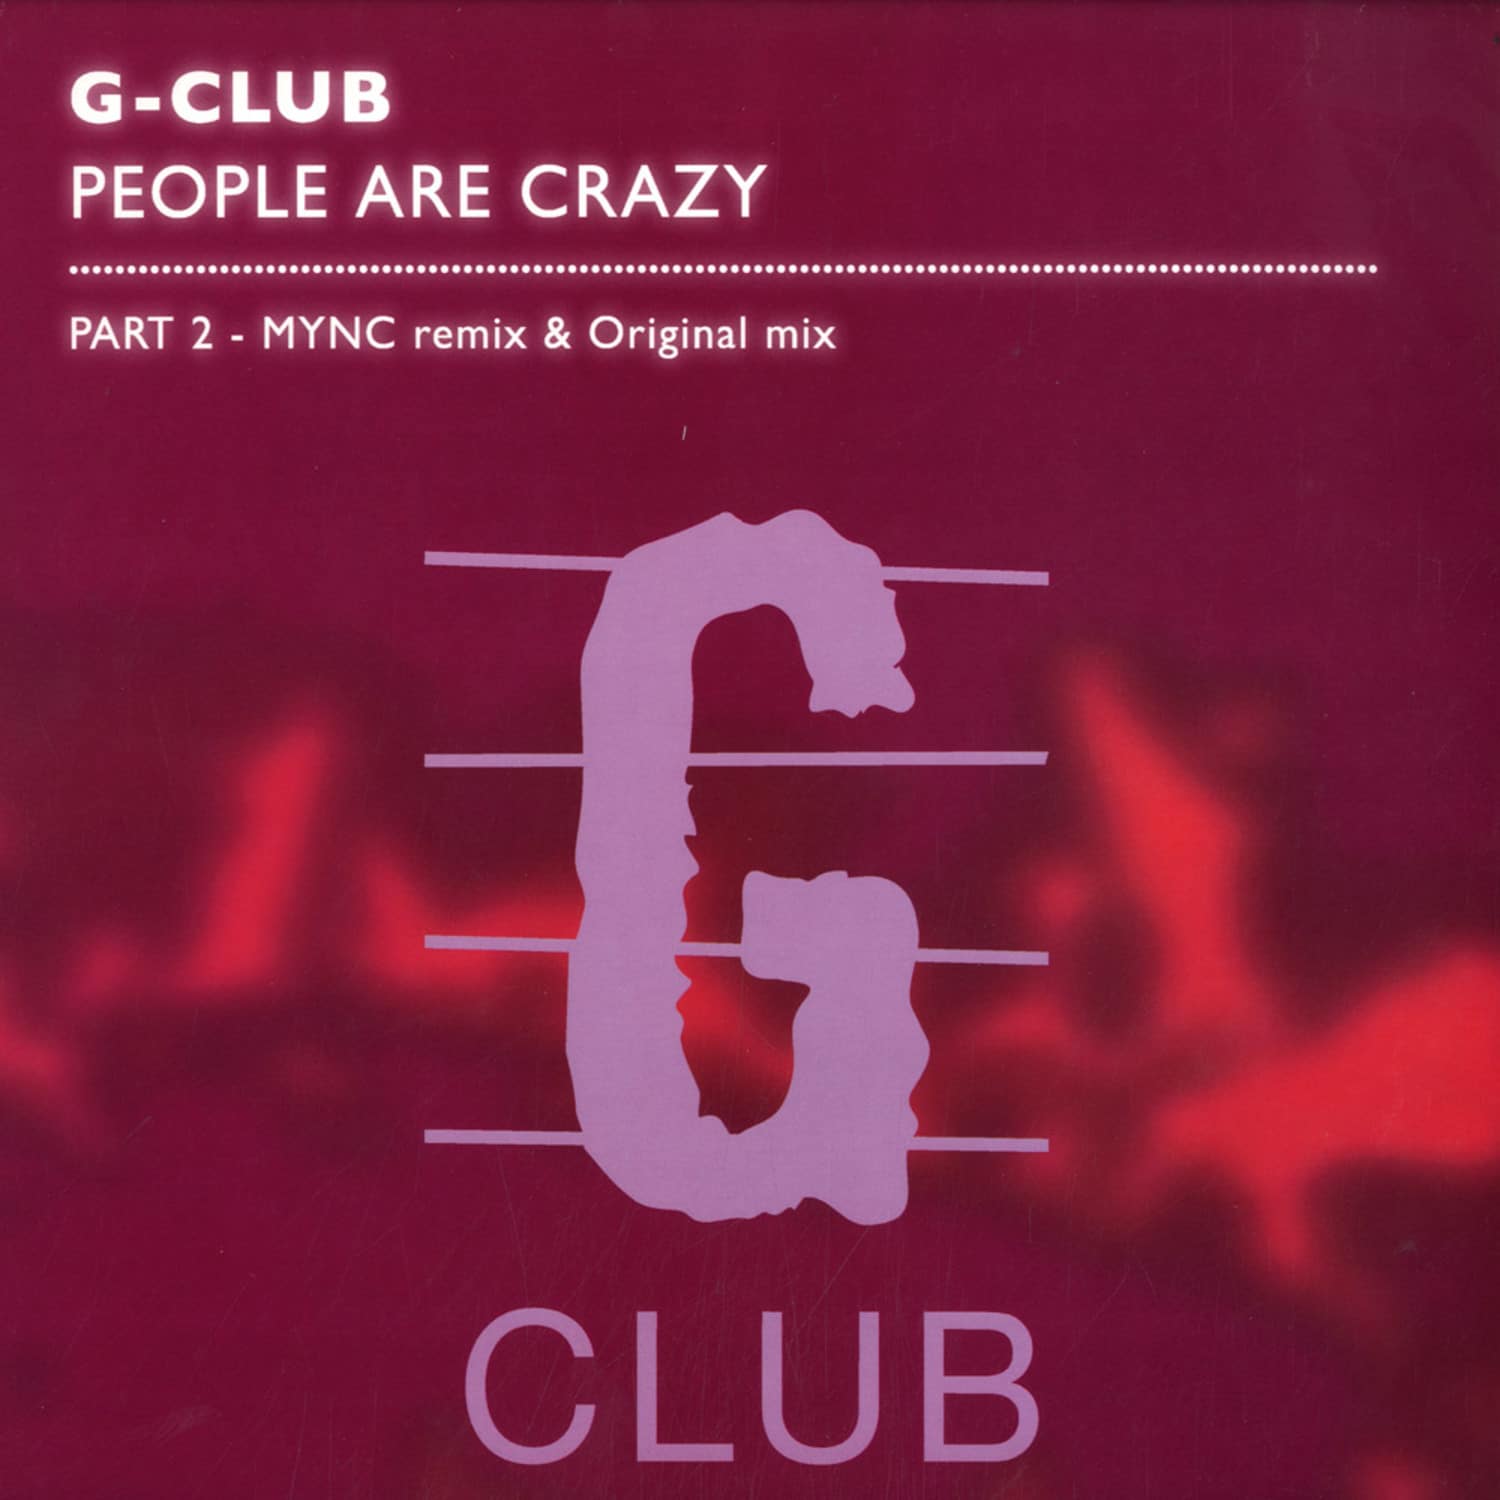 G-Club - PEOPLE ARE CRAZY REMIX